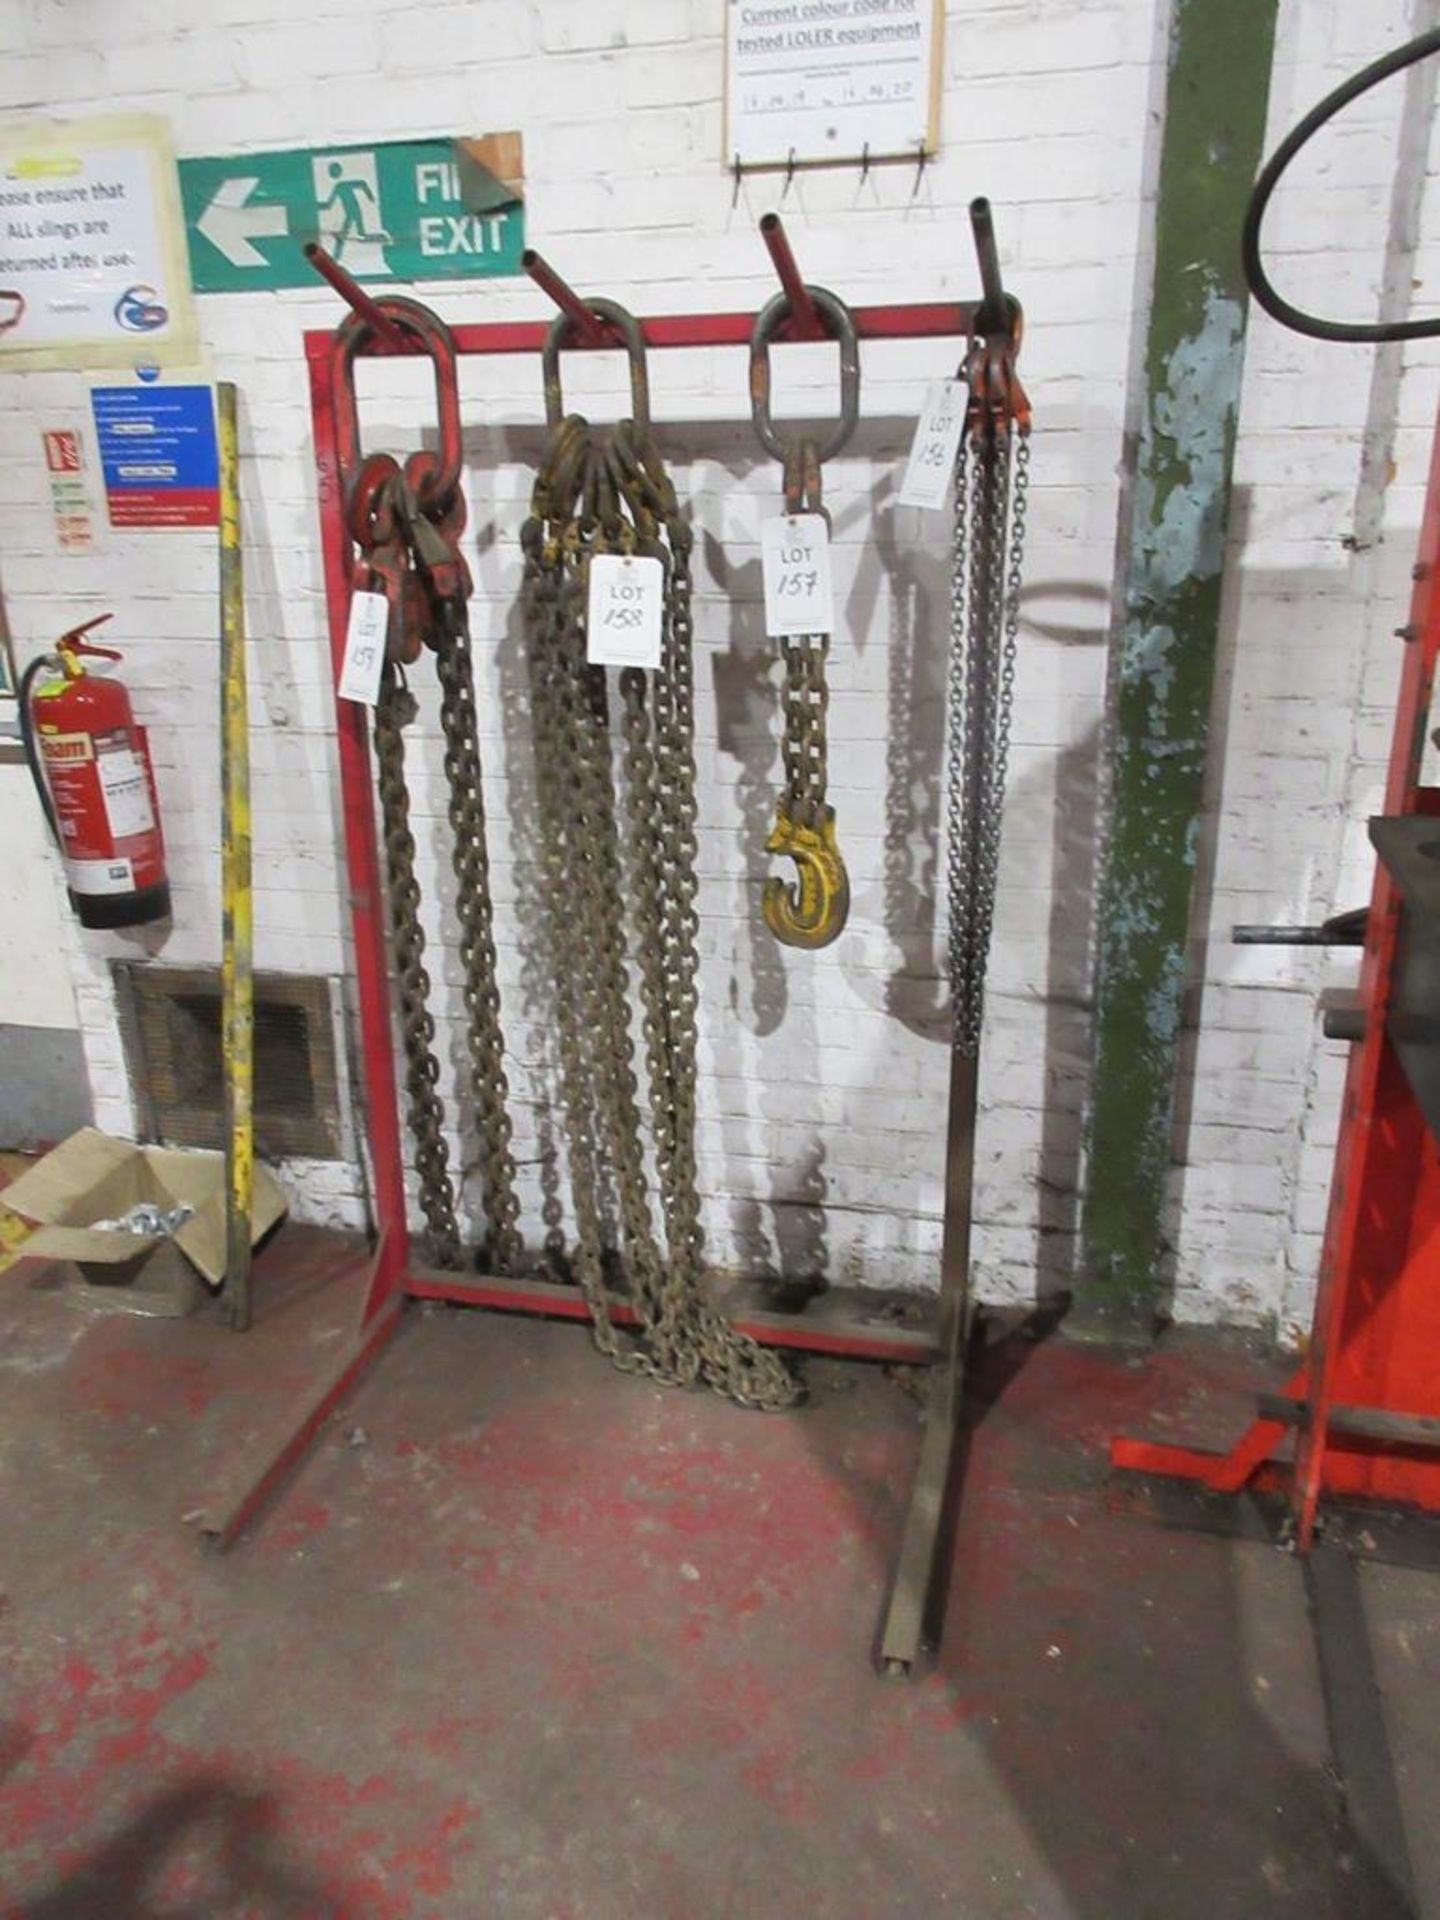 Two Fabricated steel chain storage racks - excluding contents